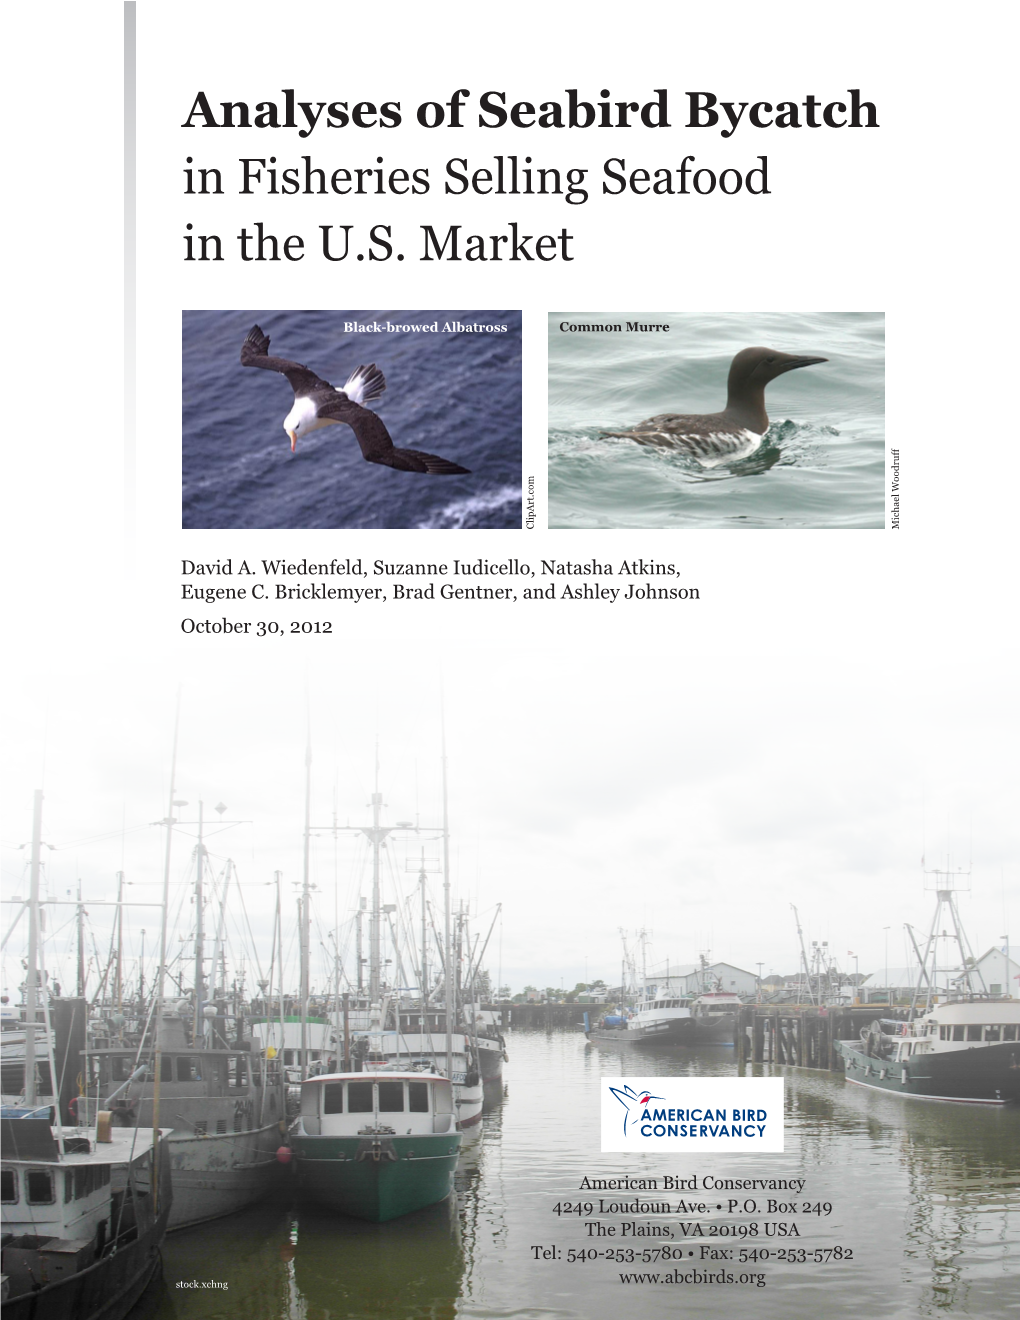 Analyses of Seabird Bycatch in Fisheries Selling Seafood in the U.S